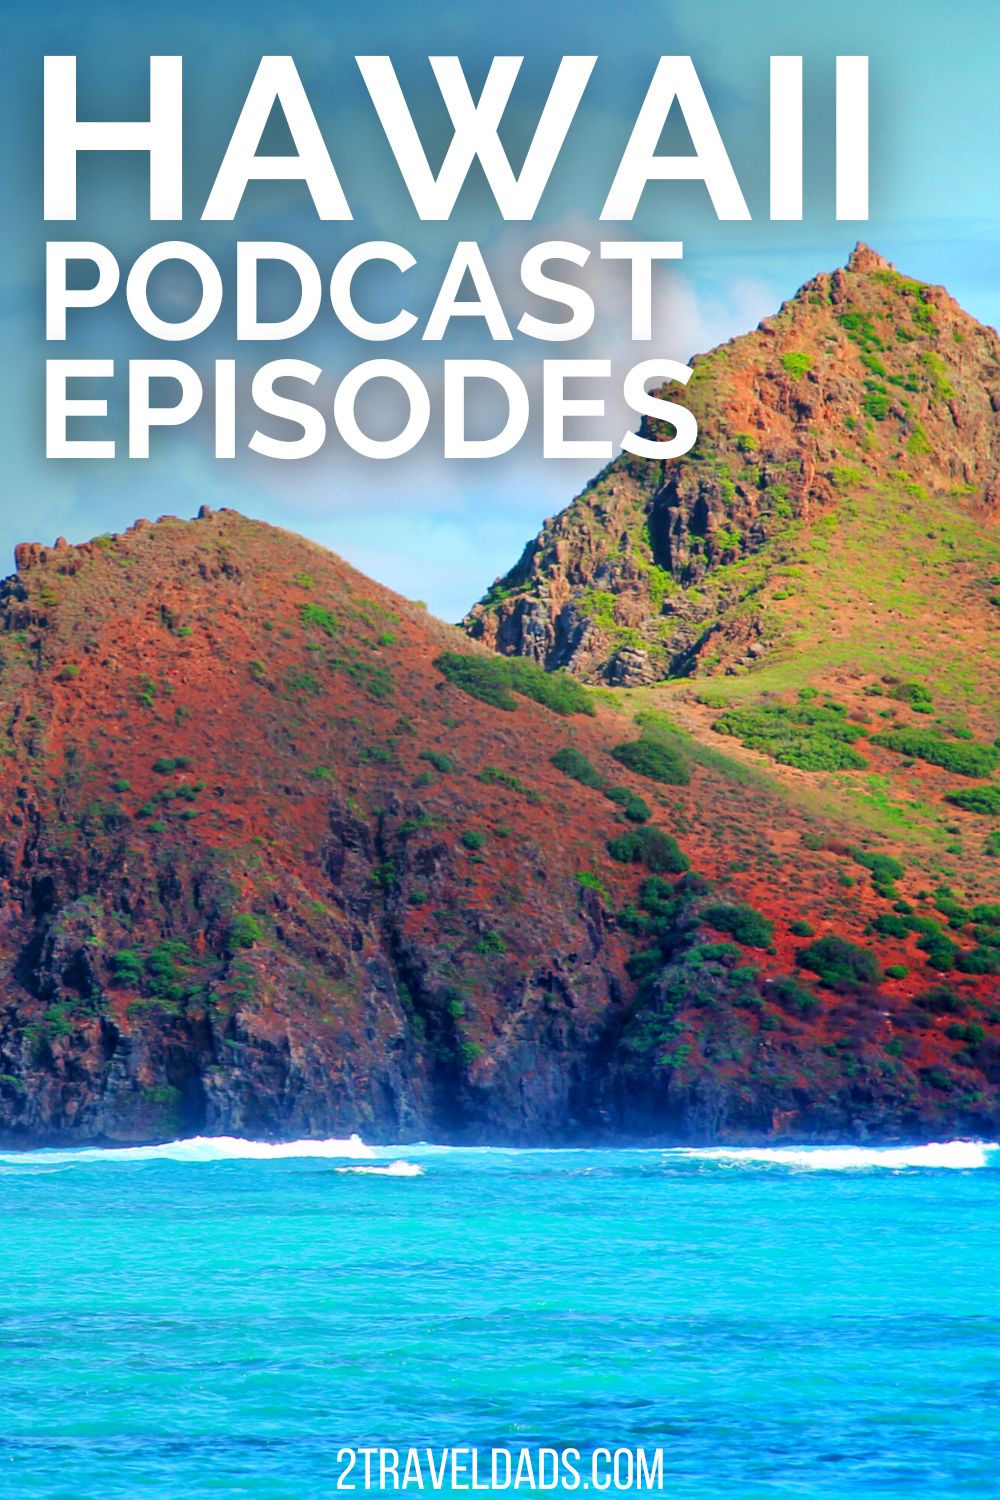 Hawaii podcast episodes are so helpful for understanding the Islands and planning an unforgettable visit. Listen to podcast episodes about the Big Island of Hawaii, exploring Kauai and more. Travel tips and easy planning ideas.